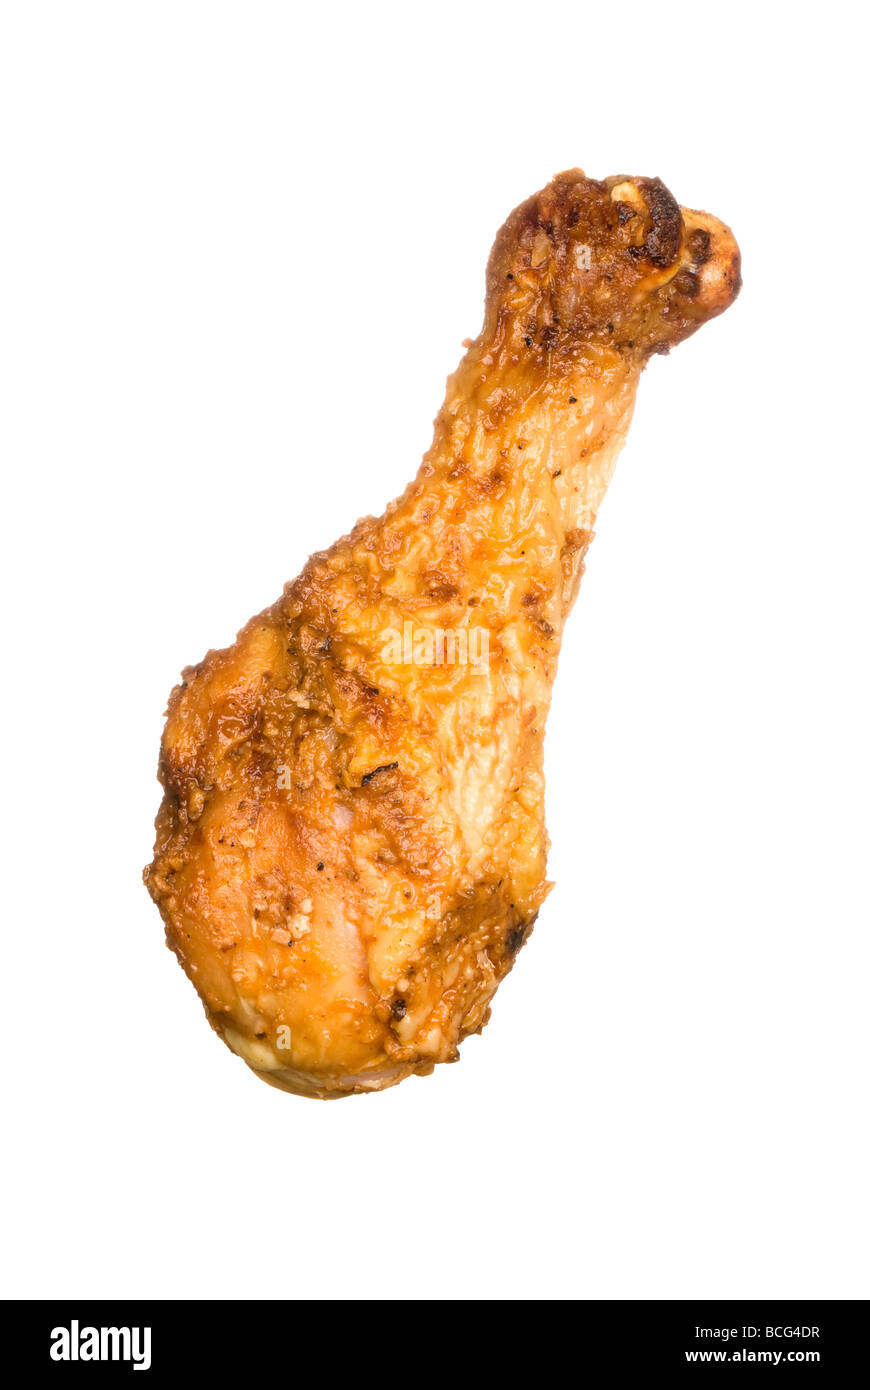 A barbecued chicken drum leg isolated on a white background Stock Photo